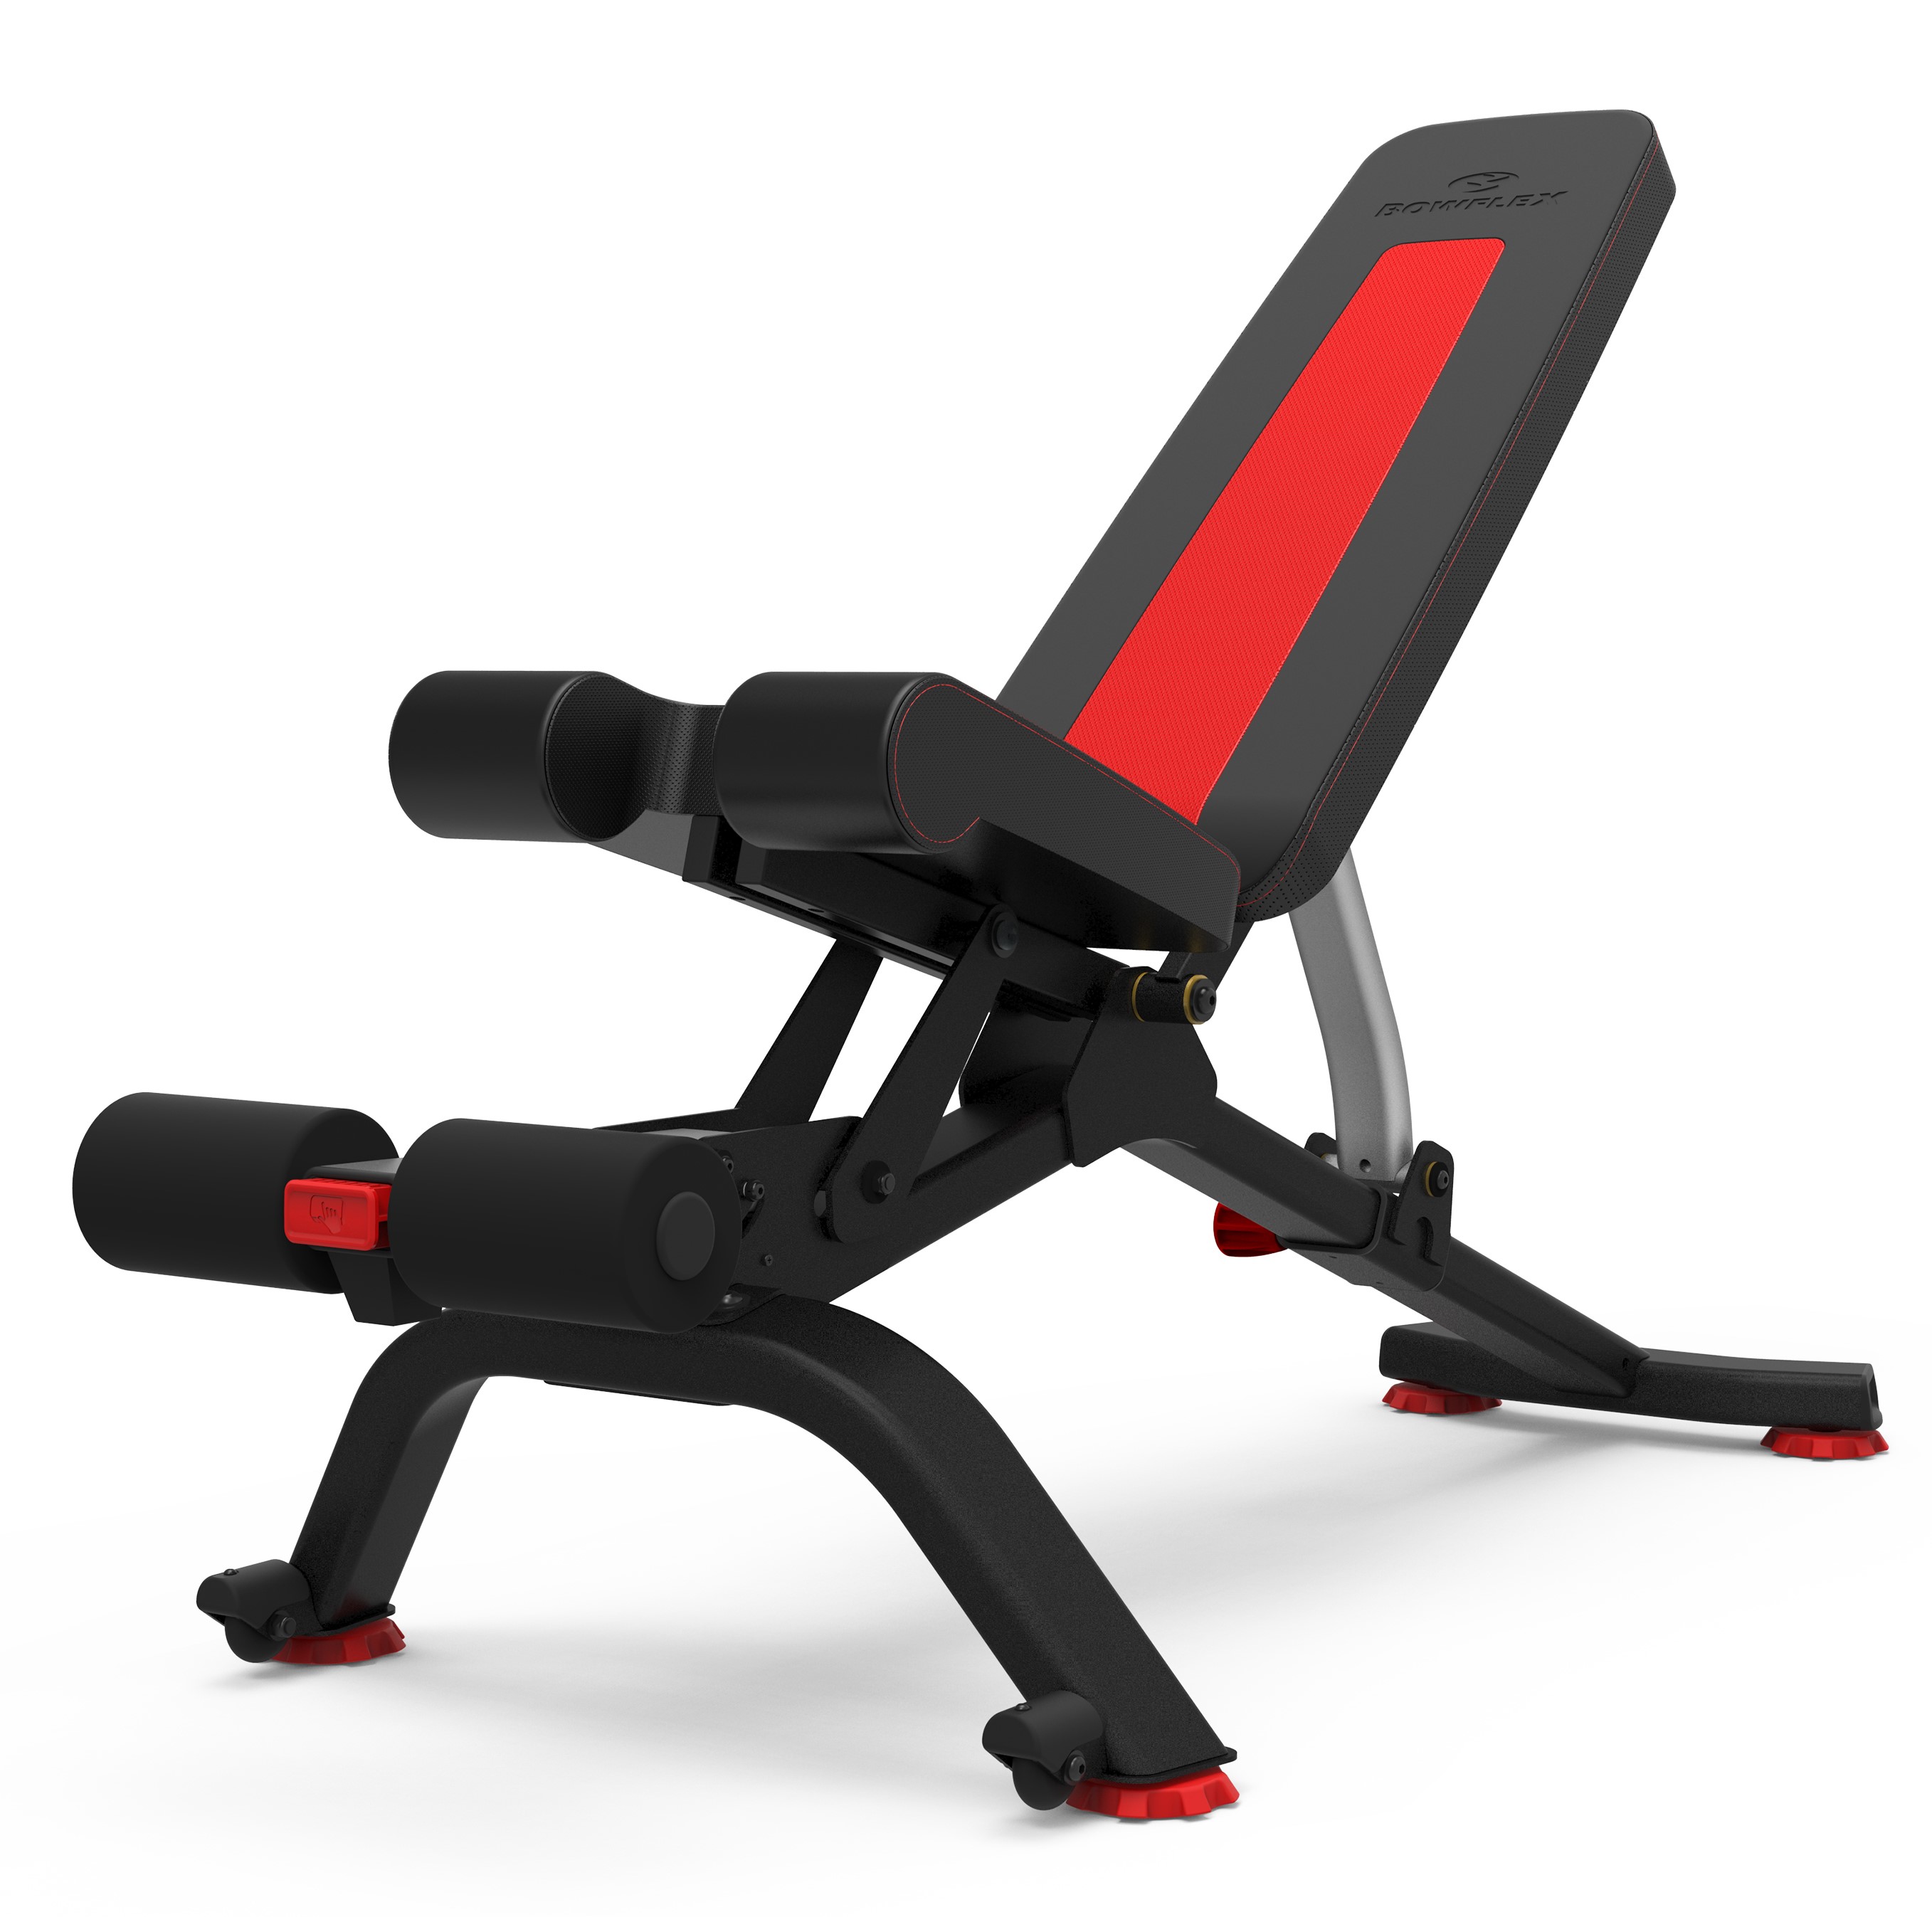 Bowflex 5.1S Stowable 6 Position Adjustable Bench - image 1 of 9